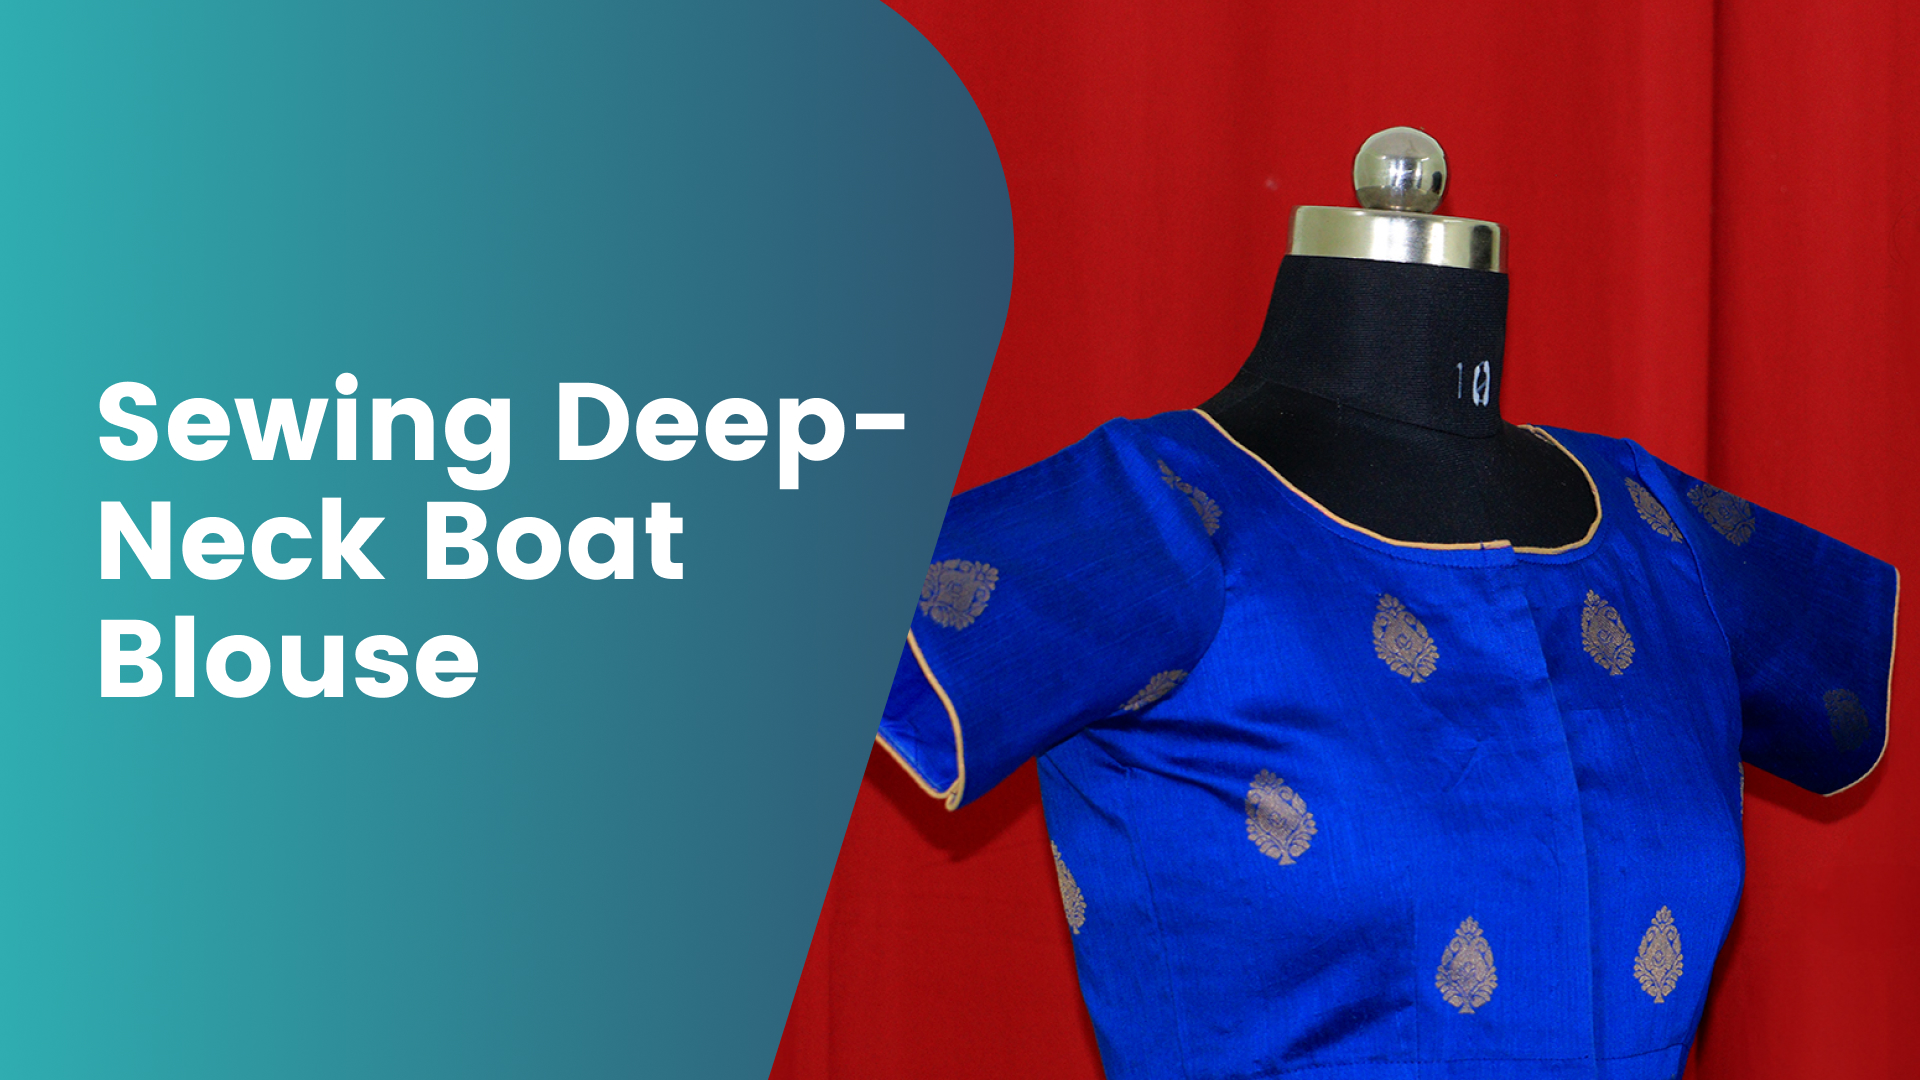 Course Trailer: How to Stitch a Boat Neck Blouse with Back Deep Neck?. Watch to know more.